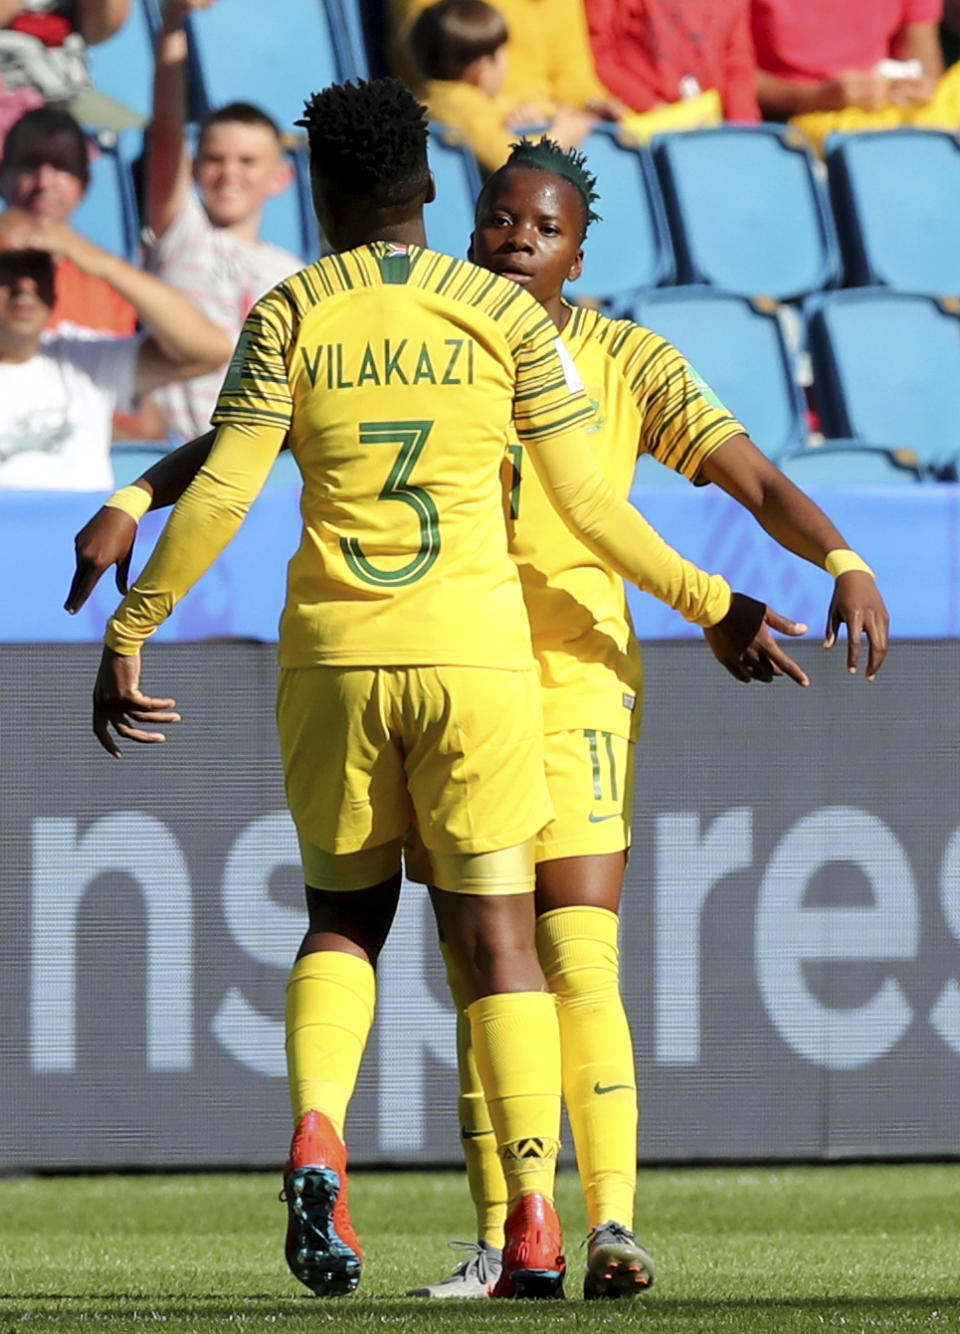 South Africa's Bambanani Mbane, left, congratulates teammate South Africa's Thembi Kgatlana after she scored the matchs first goal during the Women's World Cup Group B soccer match between Spain and South Africa at the Stade Oceane in Le Havre, France, Saturday, June 8, 2019. (AP Photo/Francisco Seco)